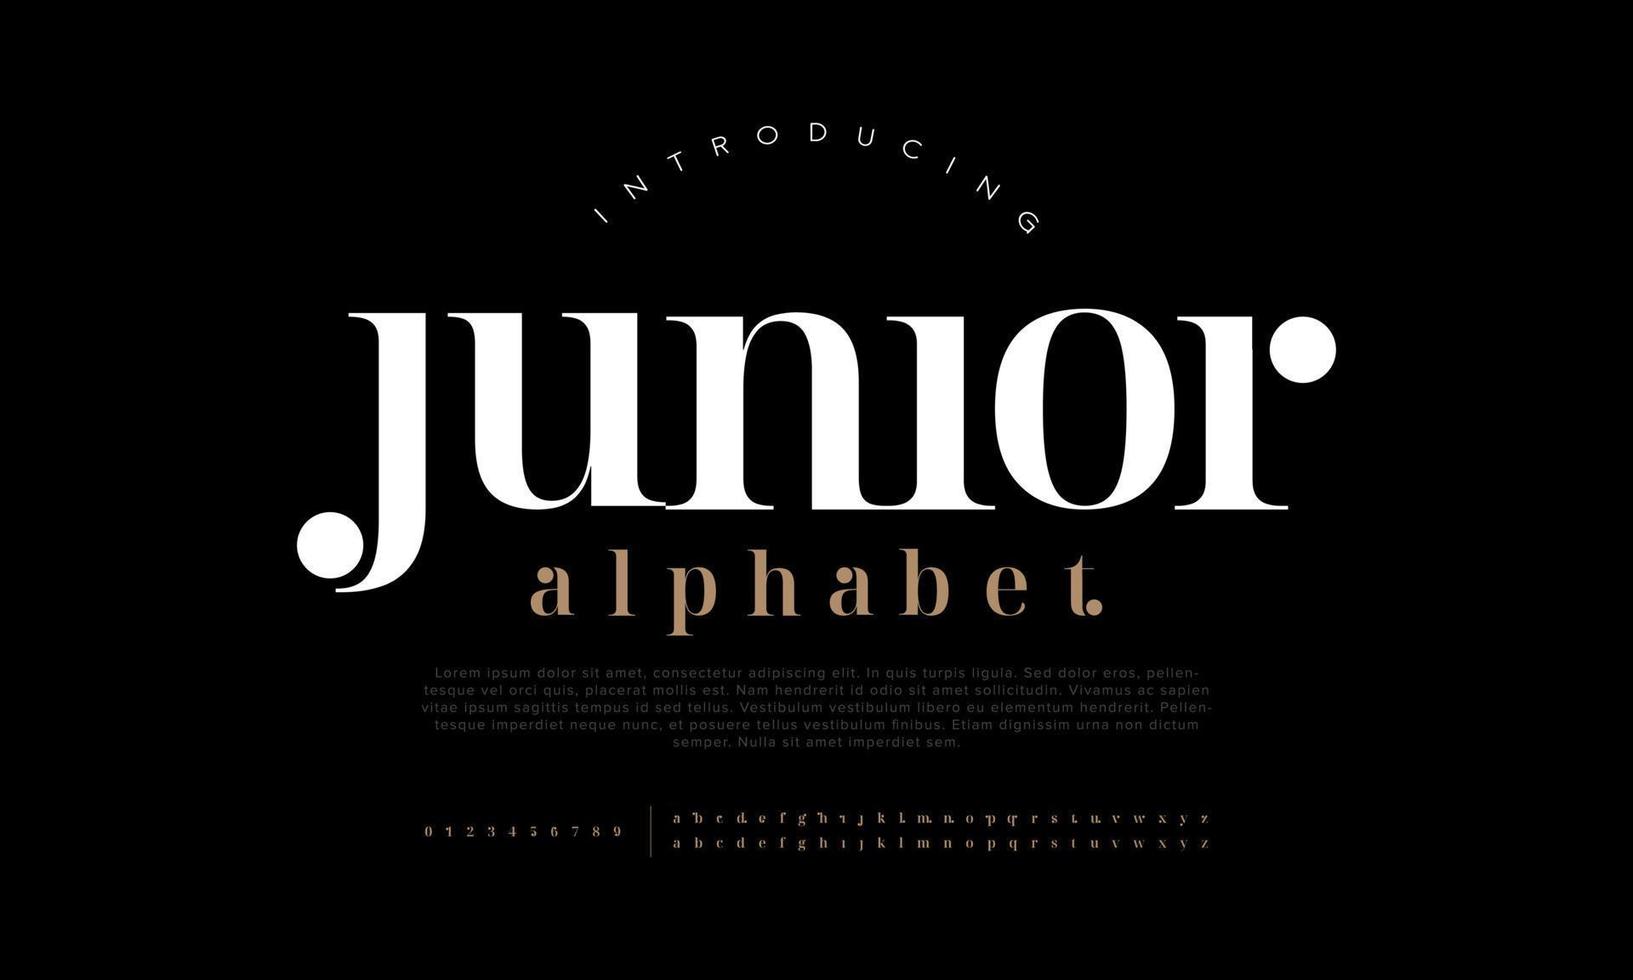 Junior fashion font alphabet. Minimal modern urban fonts for logo, brand etc. Typography typeface uppercase lowercase and number. vector illustration